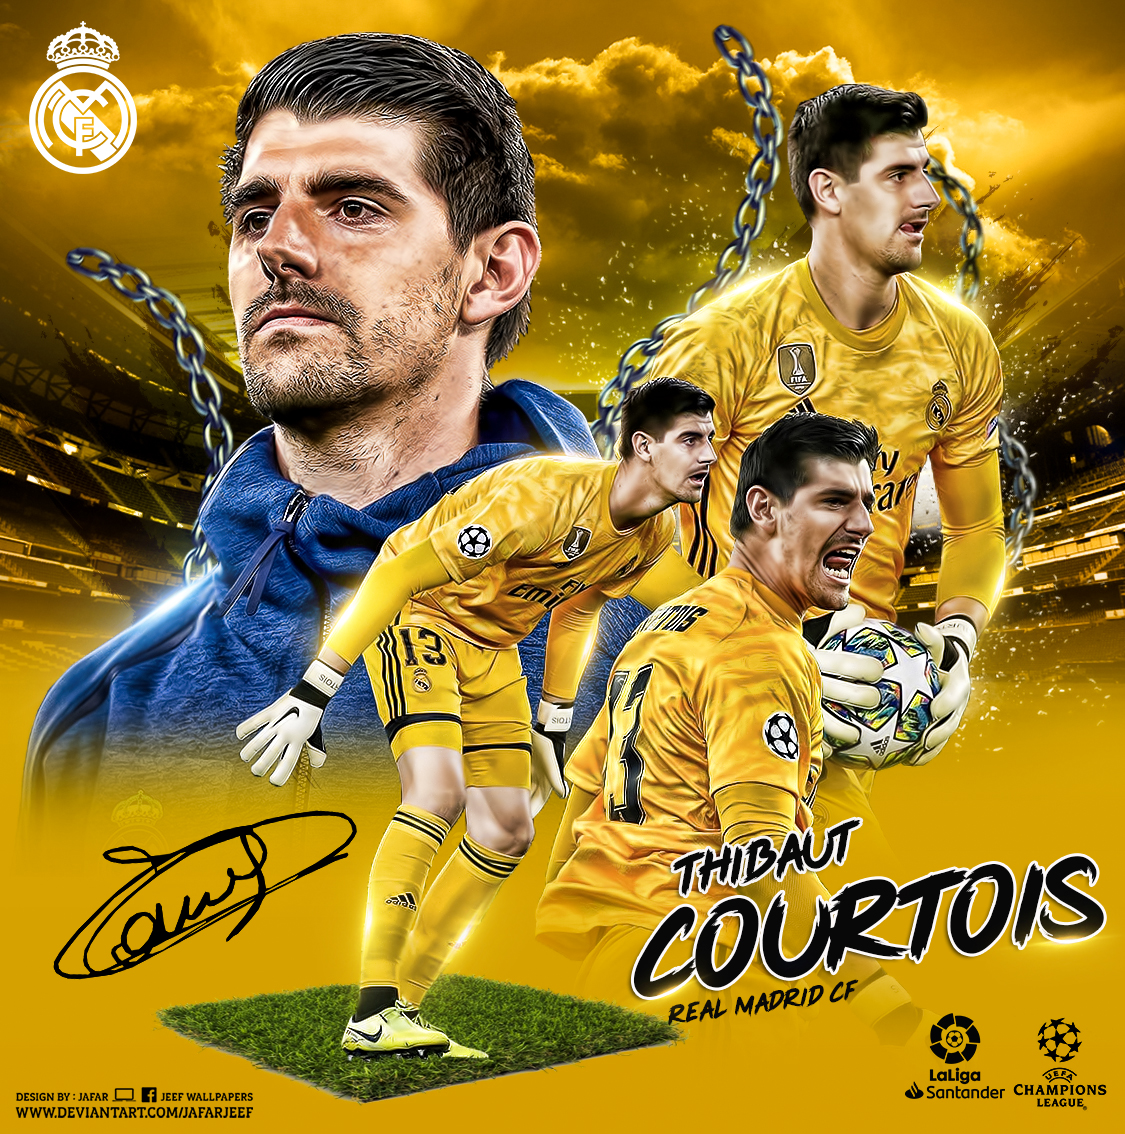 Thibaut Courtois Picture by Jafar Jeef